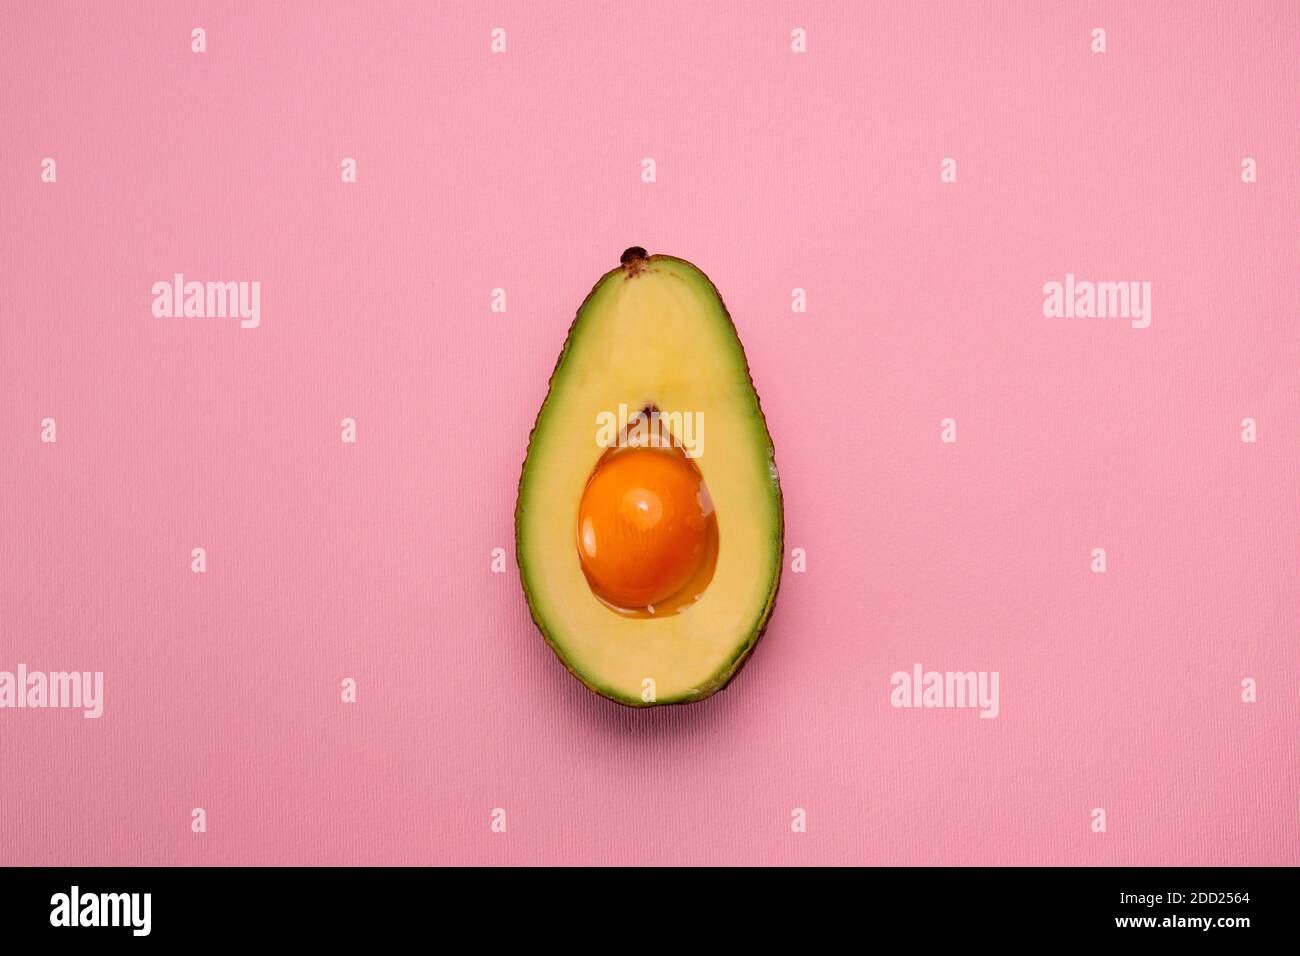 Avocado with egg yolk in middle on pink background. Creative food concept Stock Photo